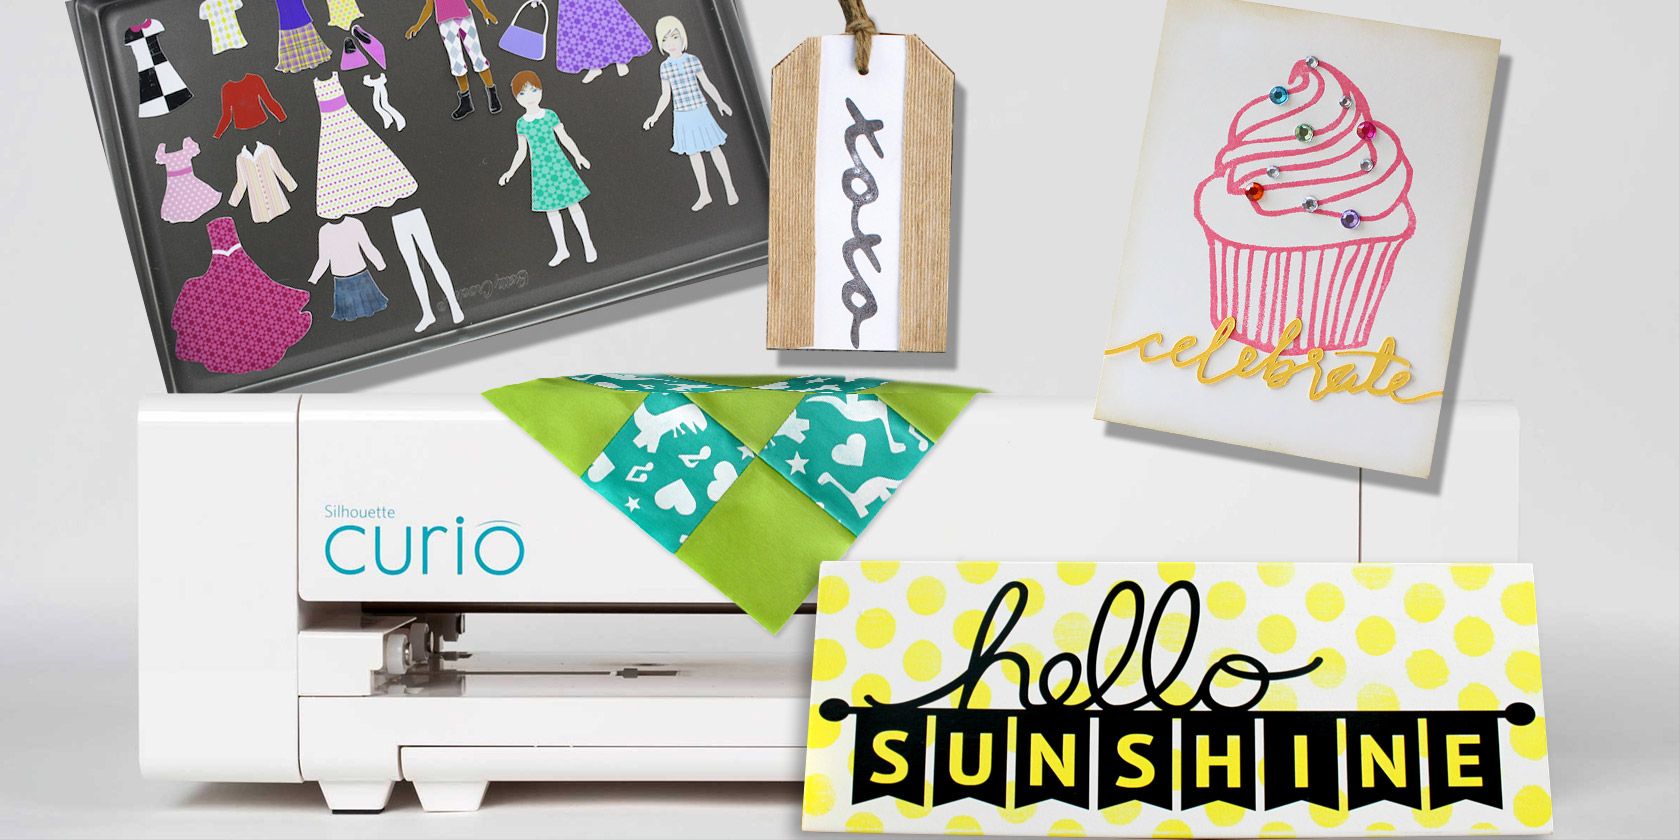 How to Use Silhouette Sketch Pens to Address Envelopes